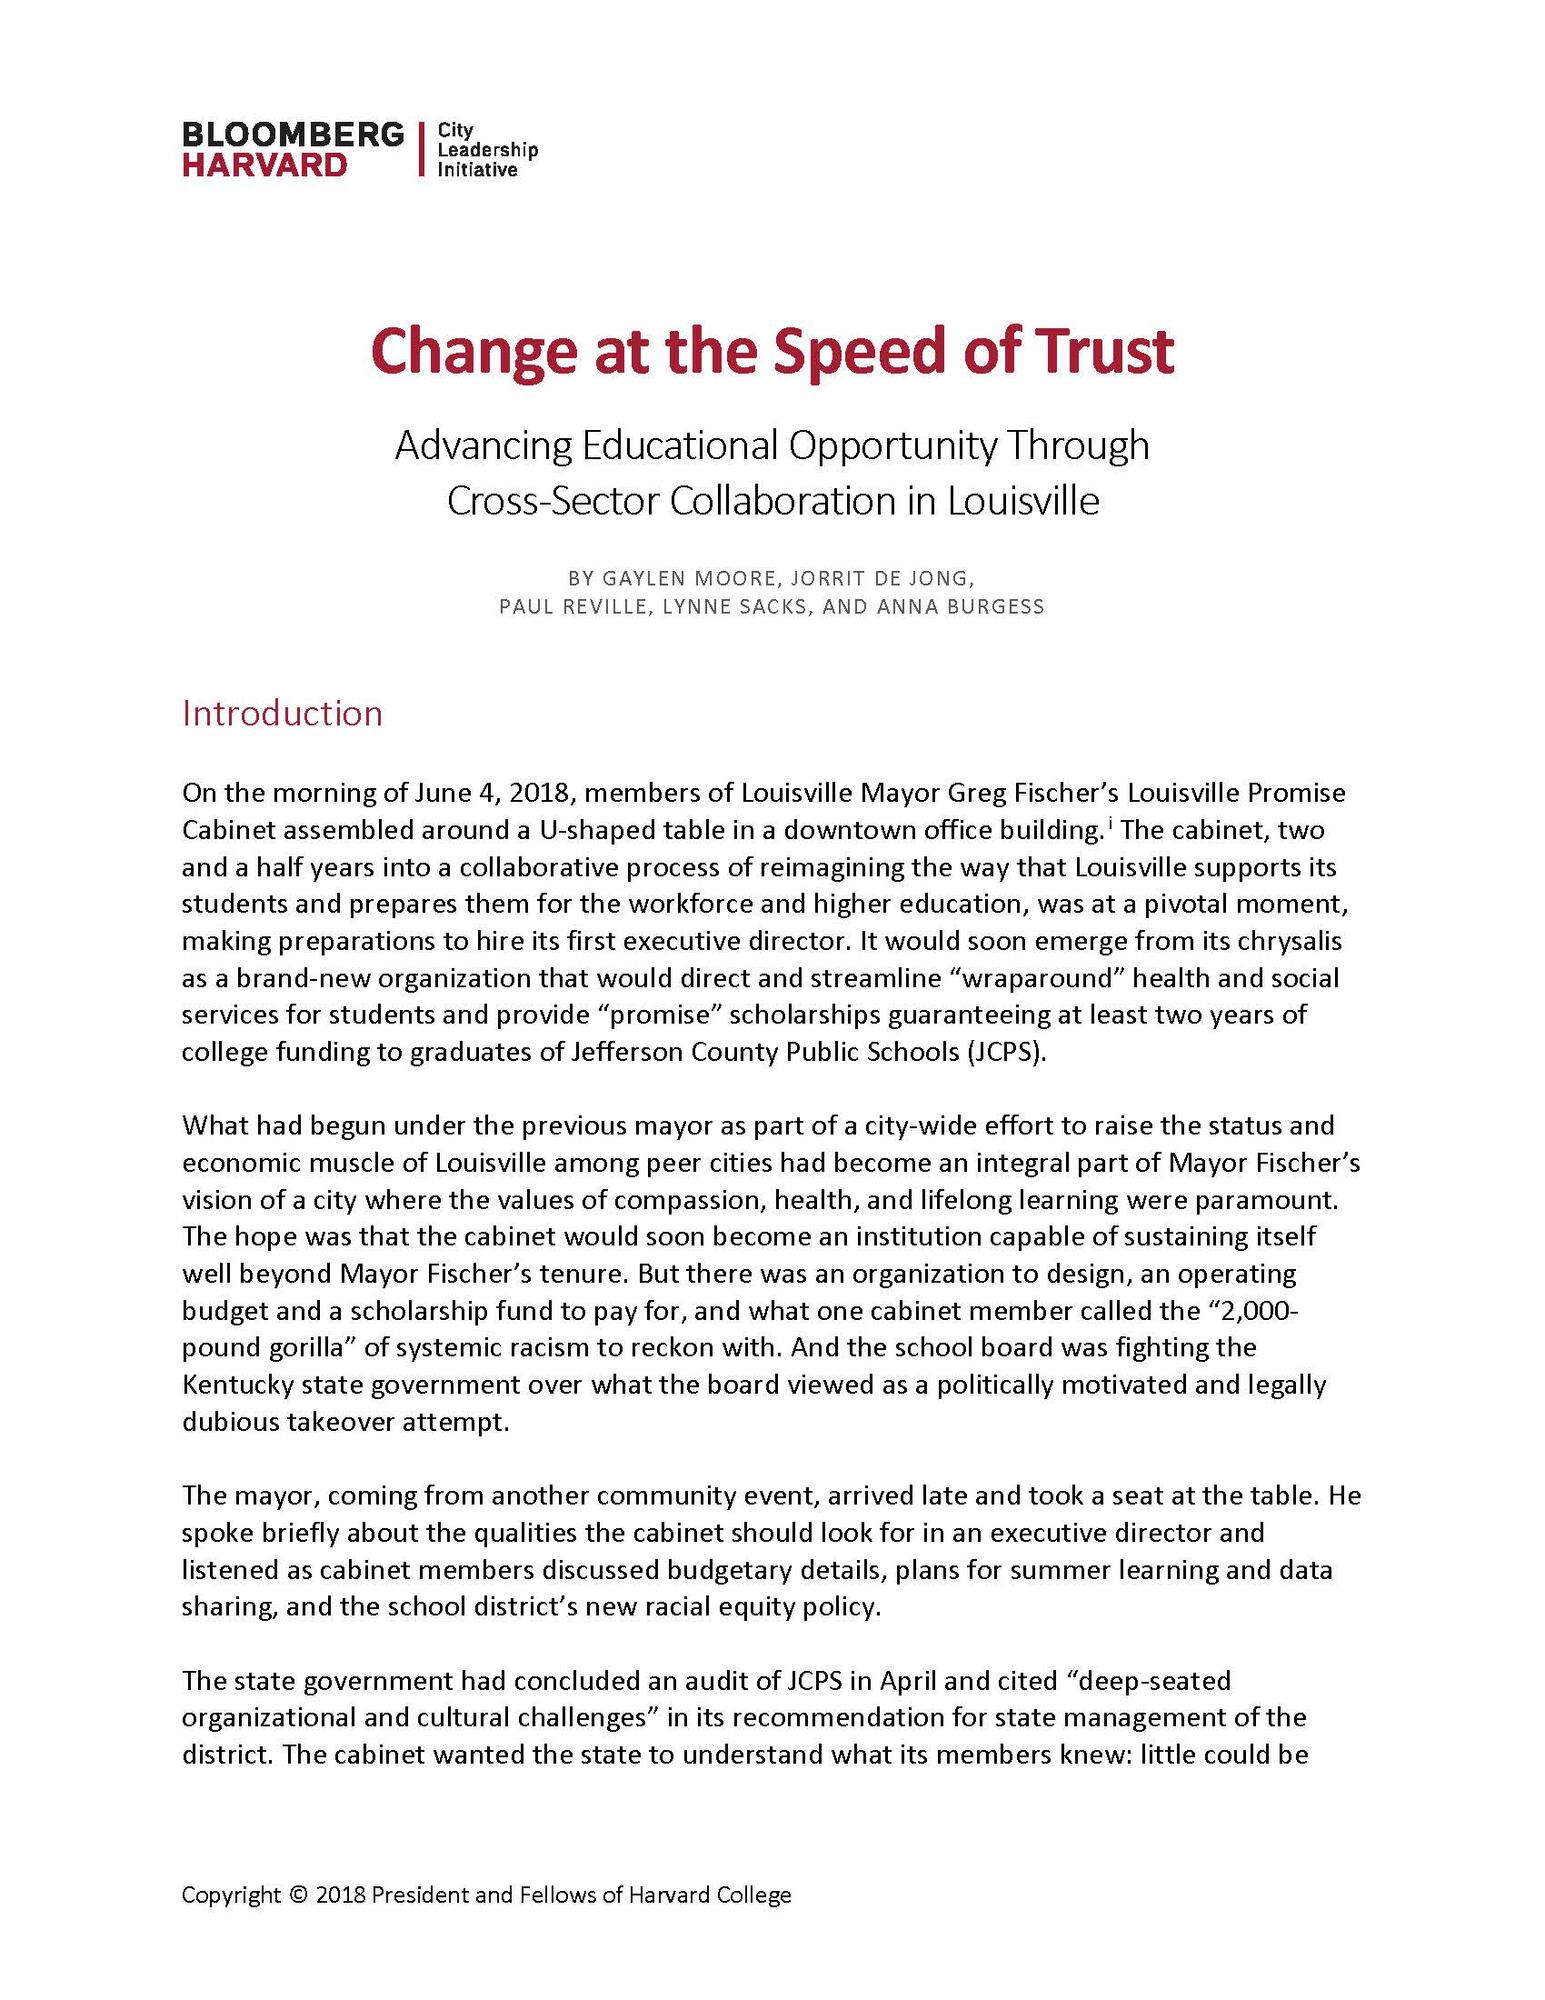 Change at the speed of trust thumbnail